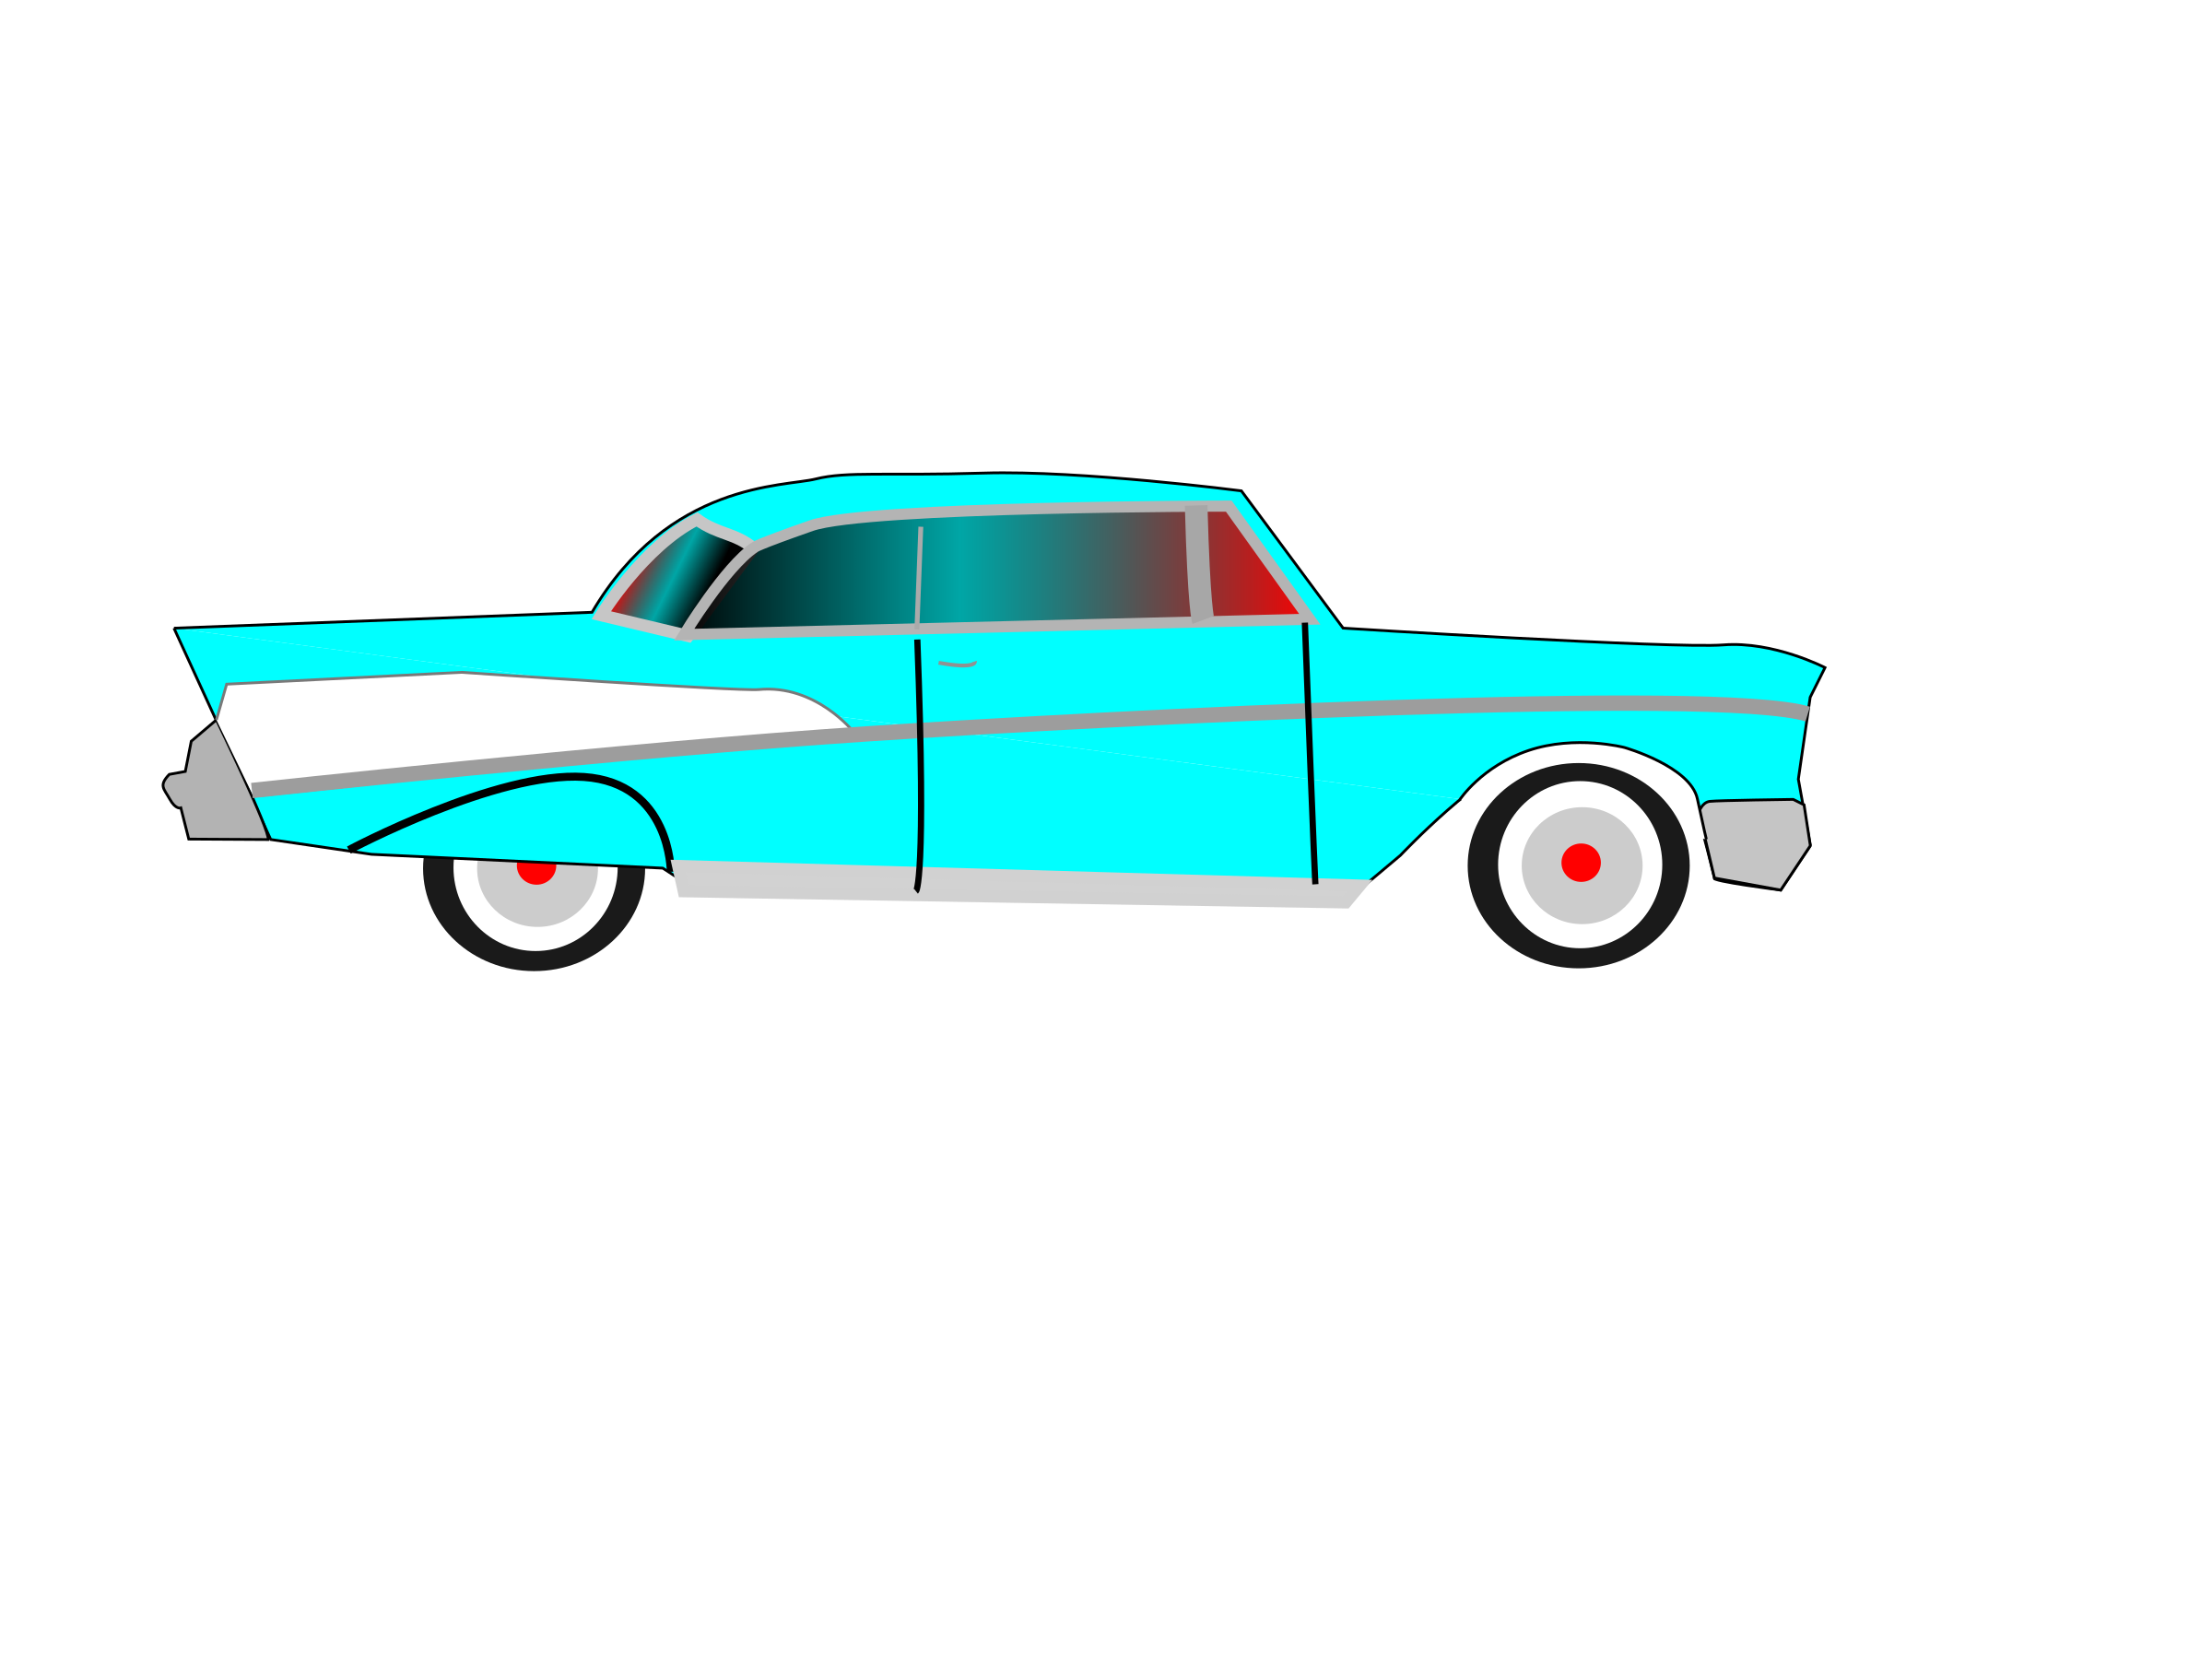 57 Chevy Silhouette #1411751 (License: Personal Use) .